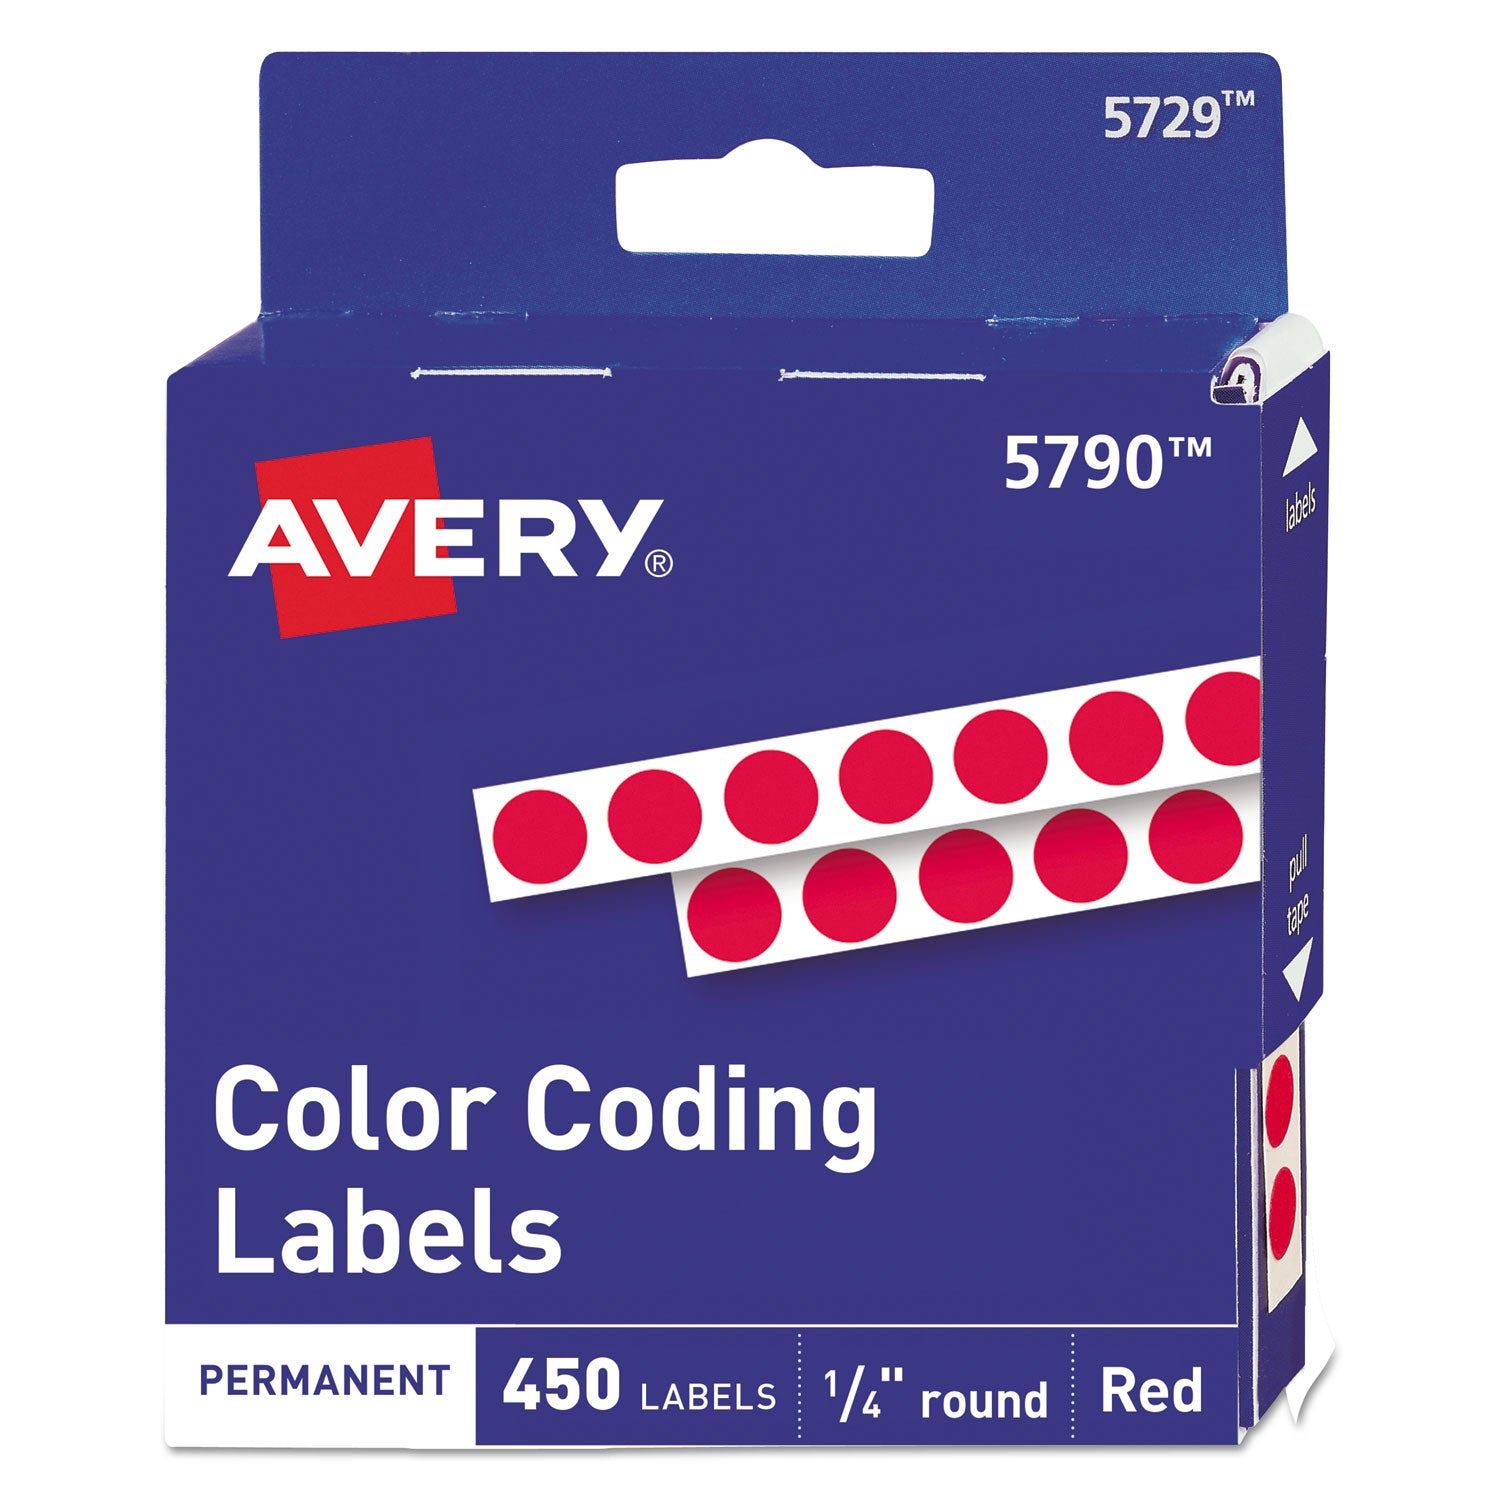 Handwrite-Only Permanent Self-Adhesive Round Color-Coding Labels in Dispensers, 0.25" dia, Red, 450/Roll, (5790) - 